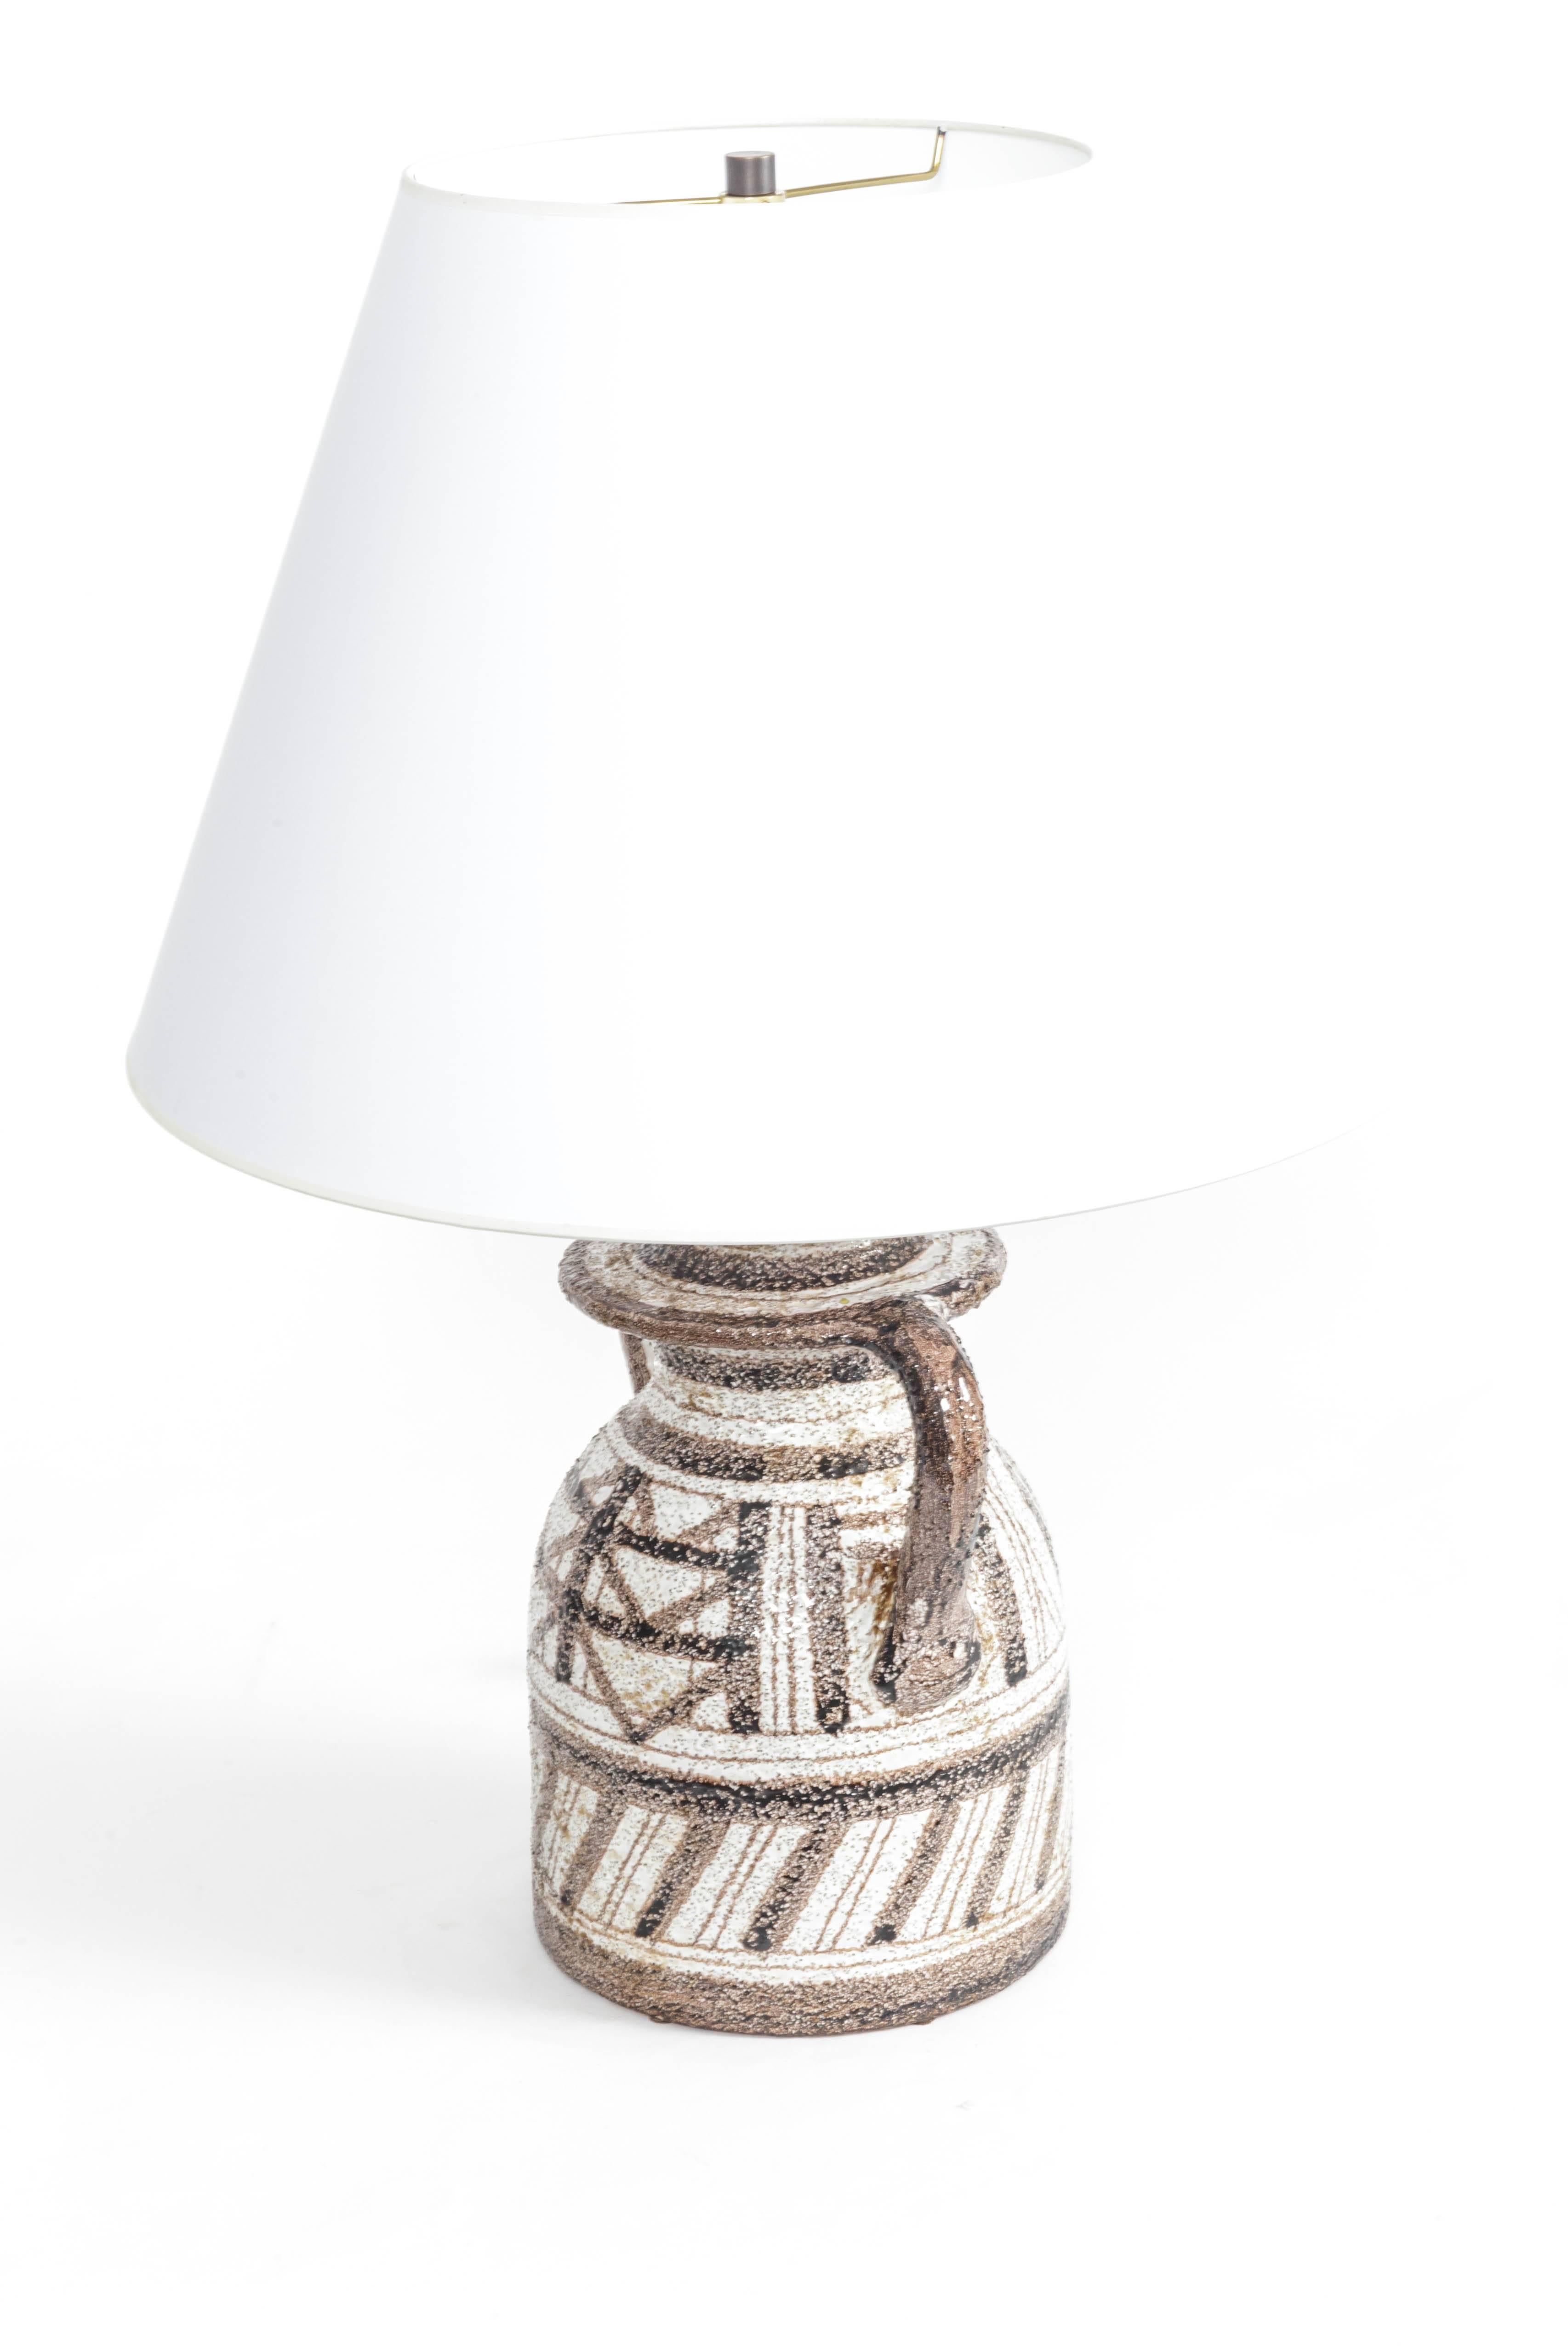 Rosenthal Netter Graphic Textured Table Lamp 1